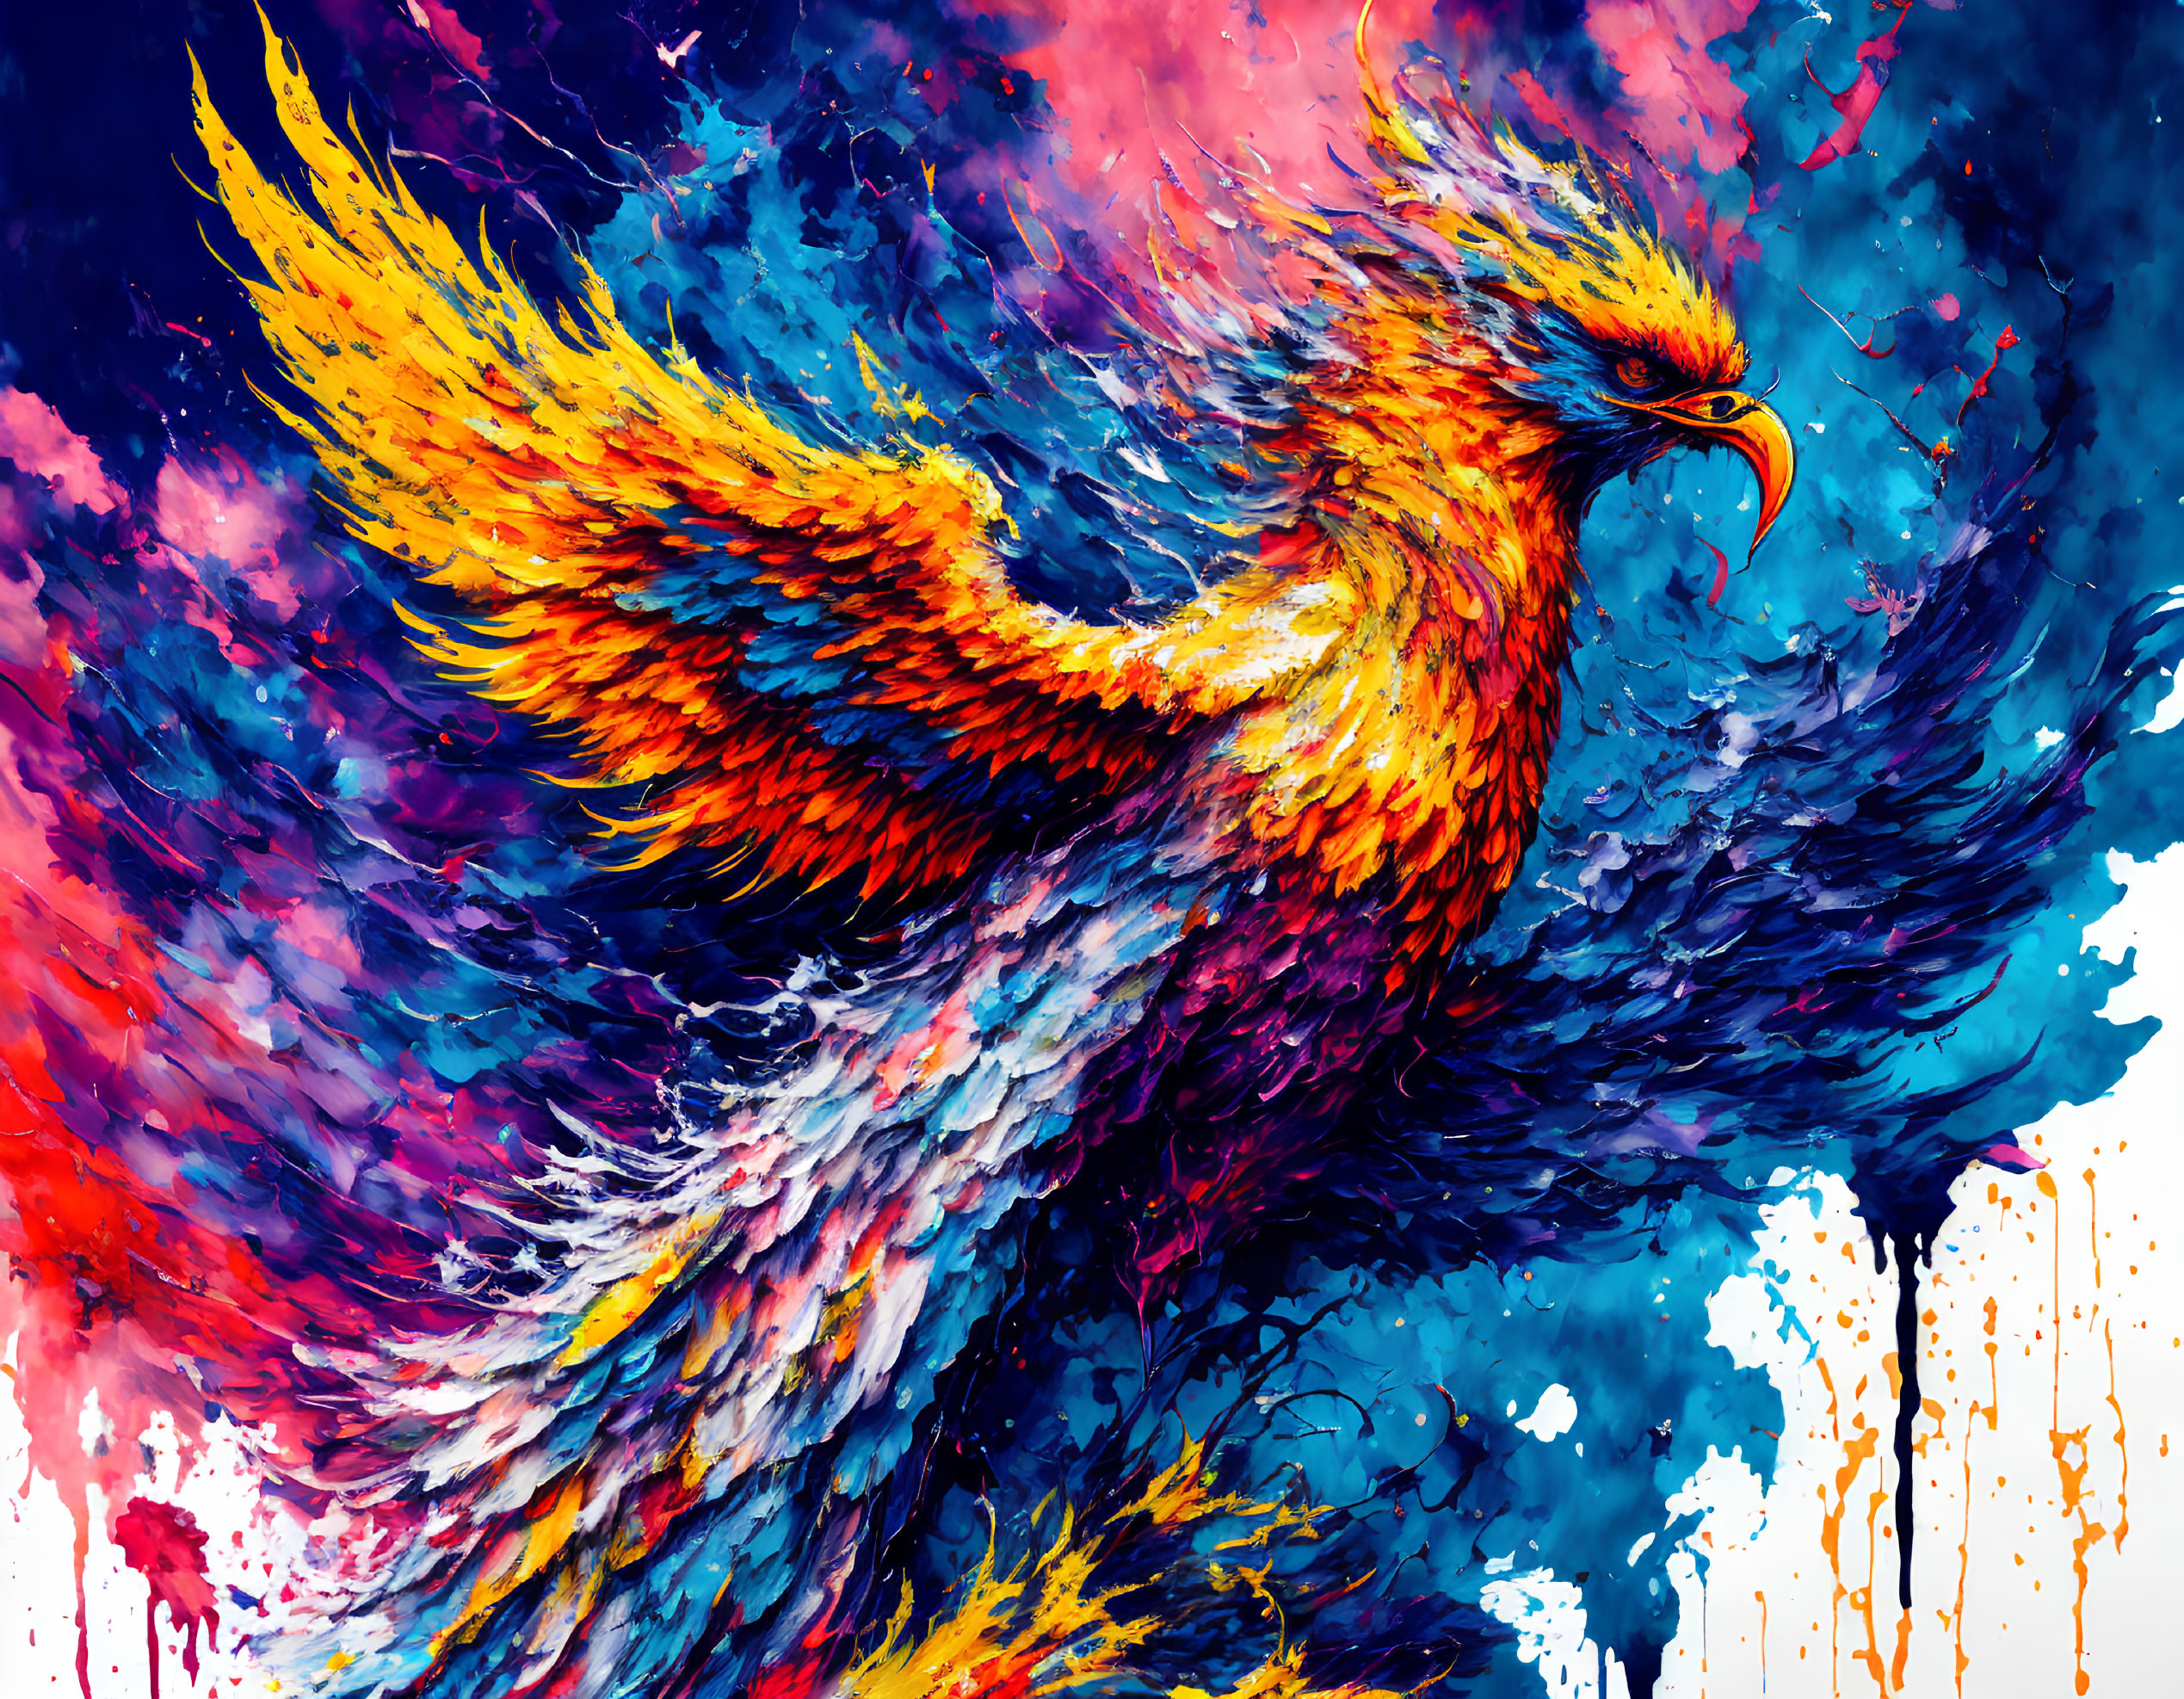 Colorful Mythical Phoenix Flying in Fiery Background